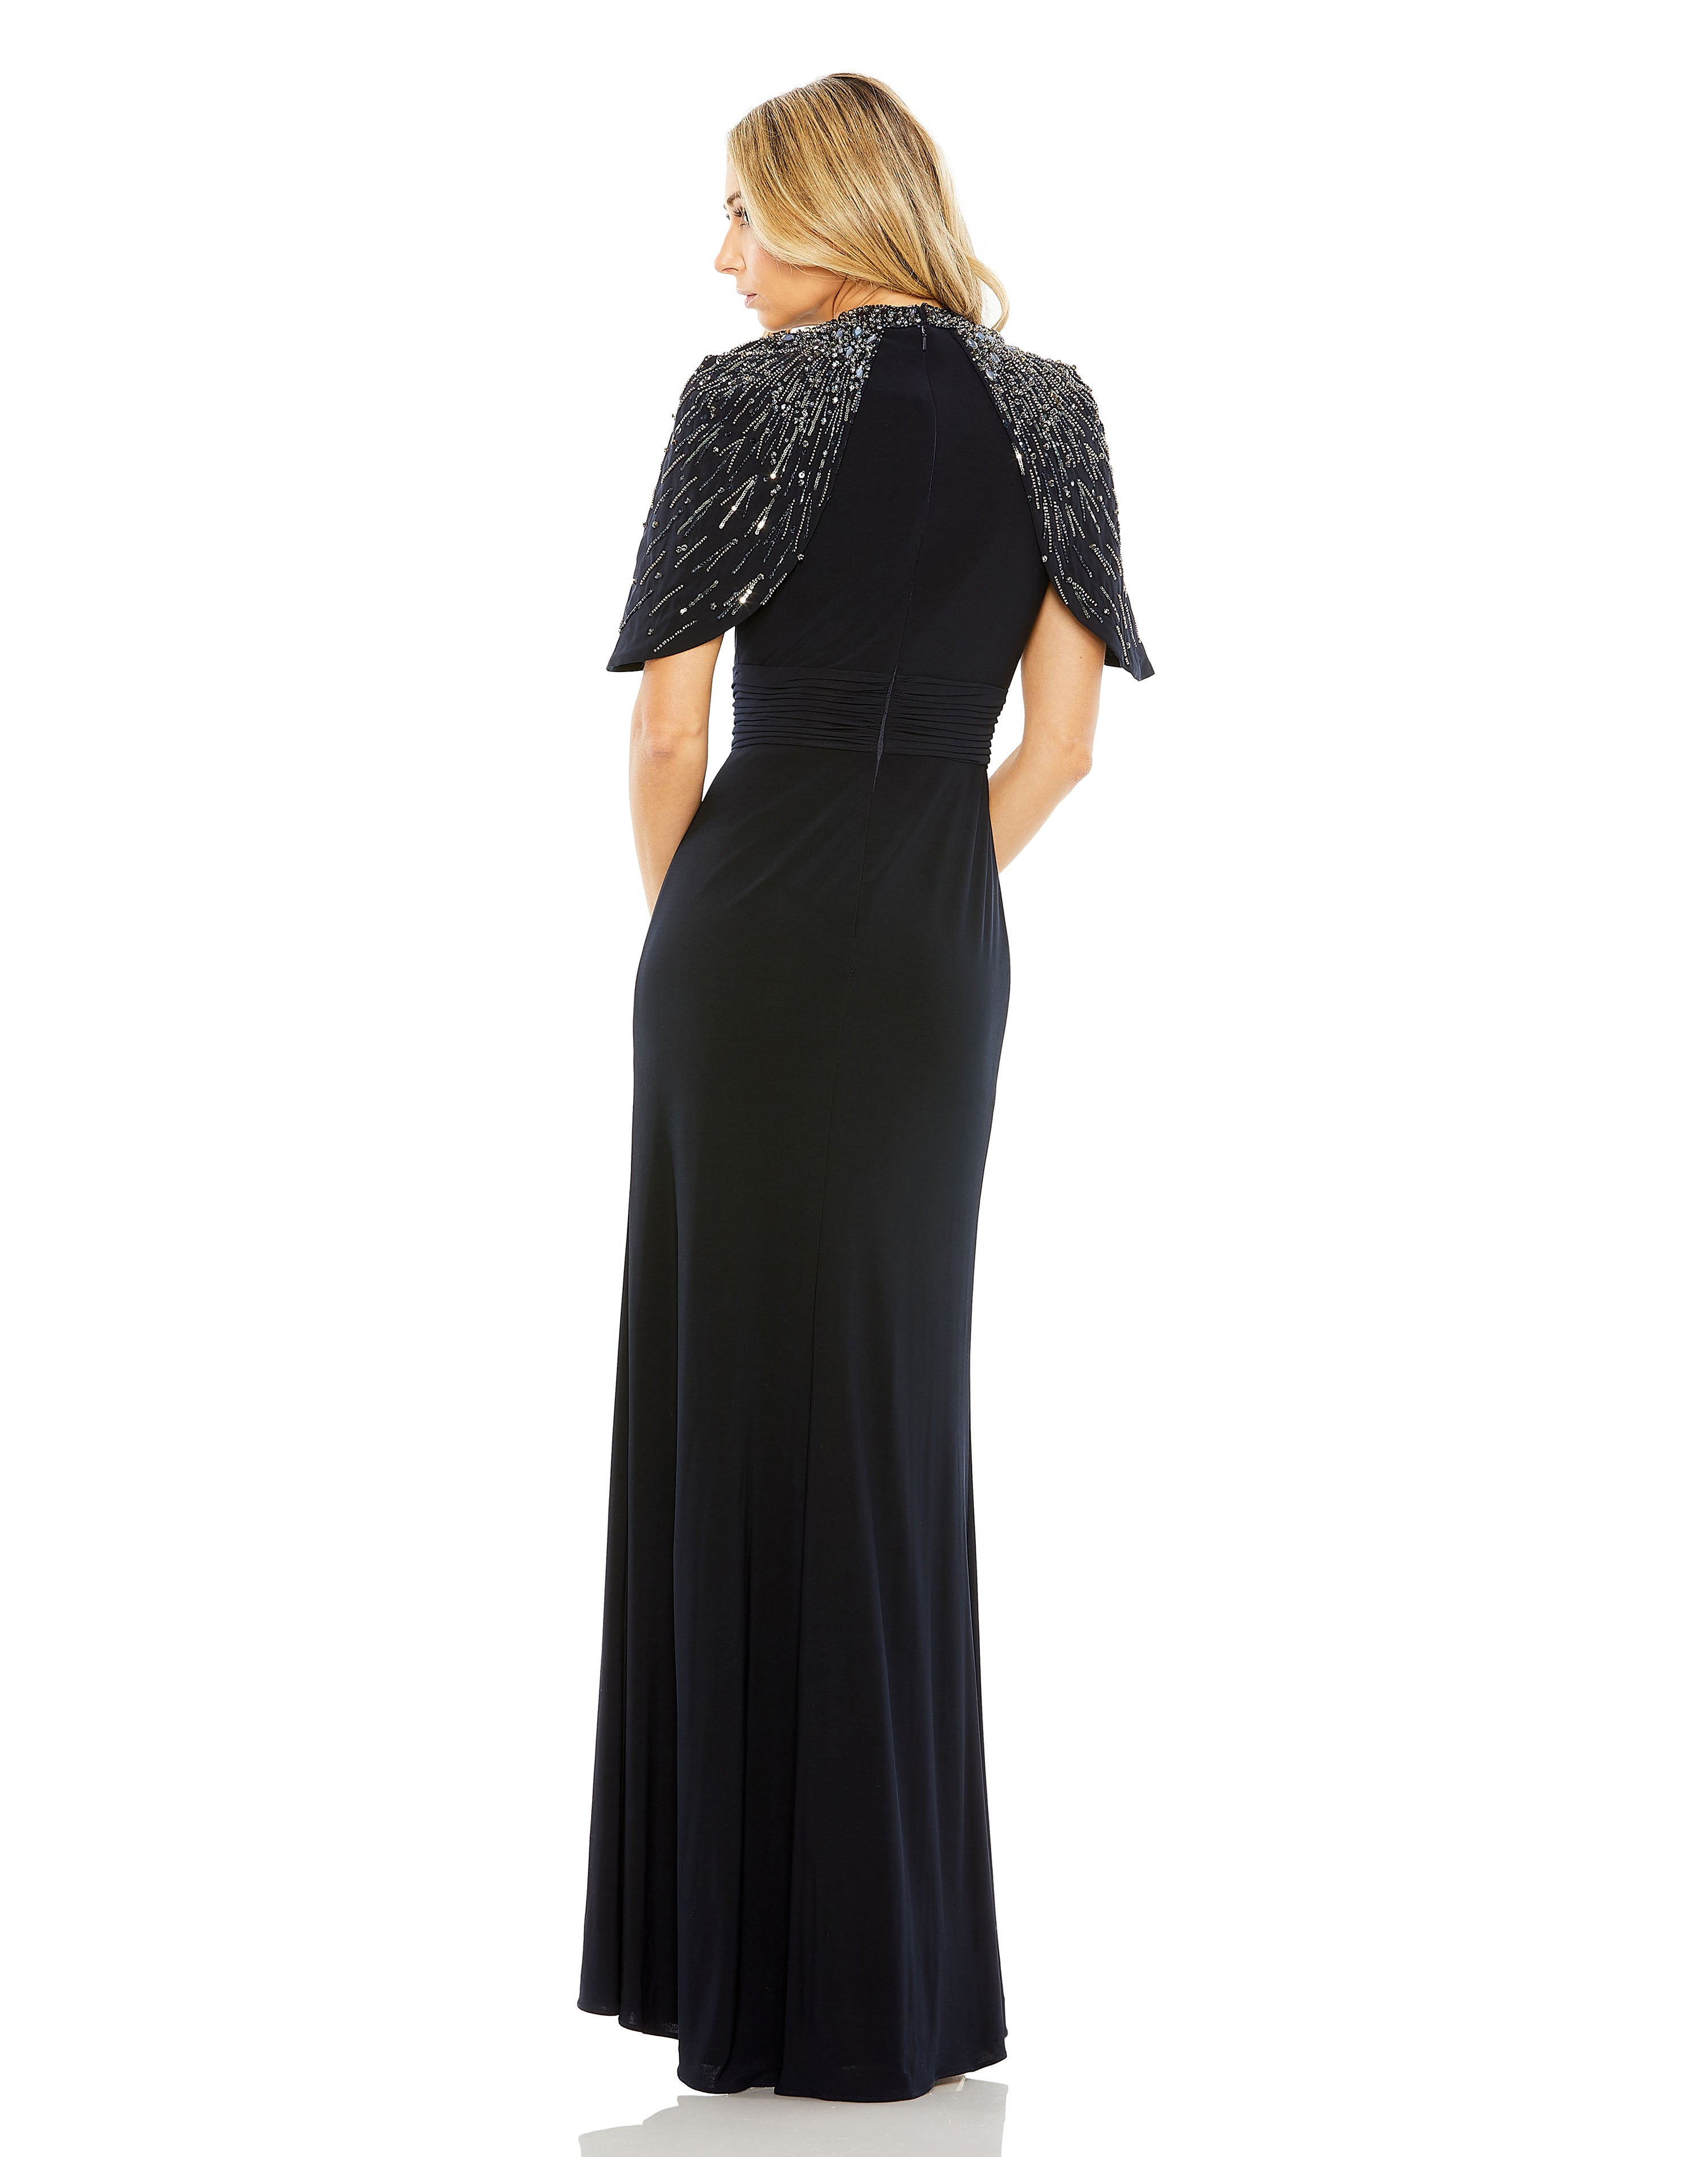 High Neck Column Gown with Embellished Cape